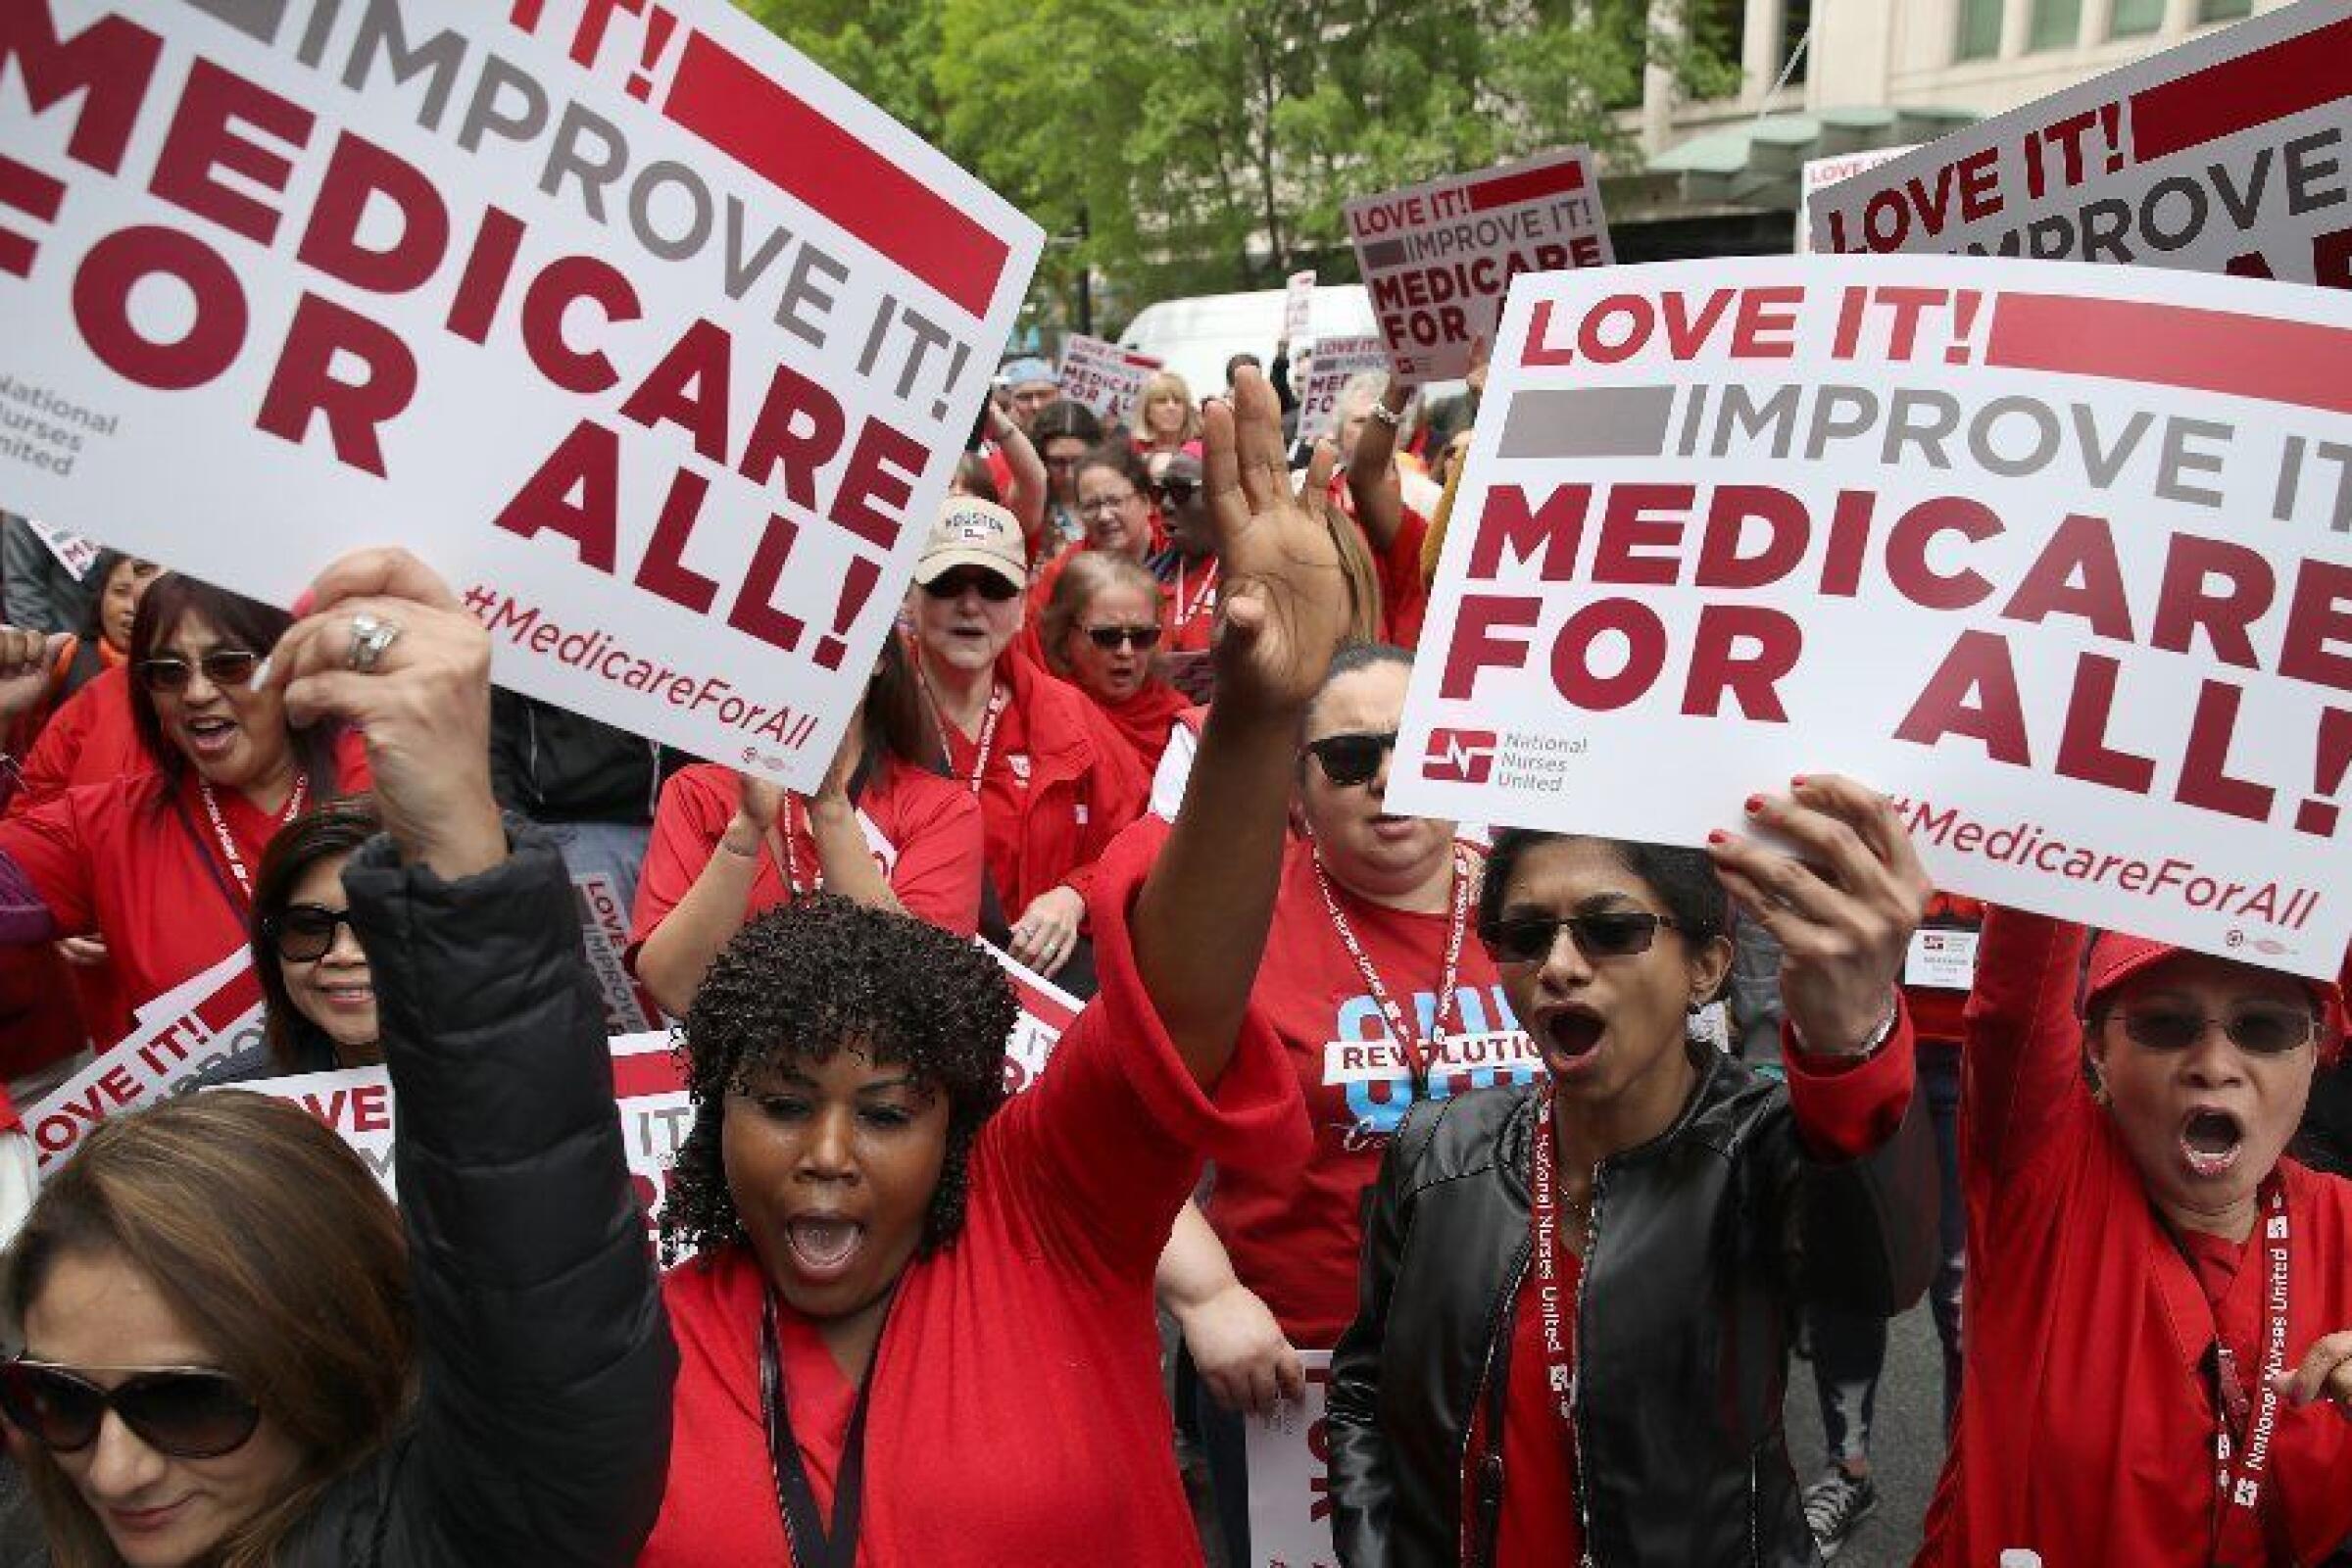 Demonstrators rally in support of "Medicare for all" outside PhRMA headquarters in Washington, D.C., on April 29.